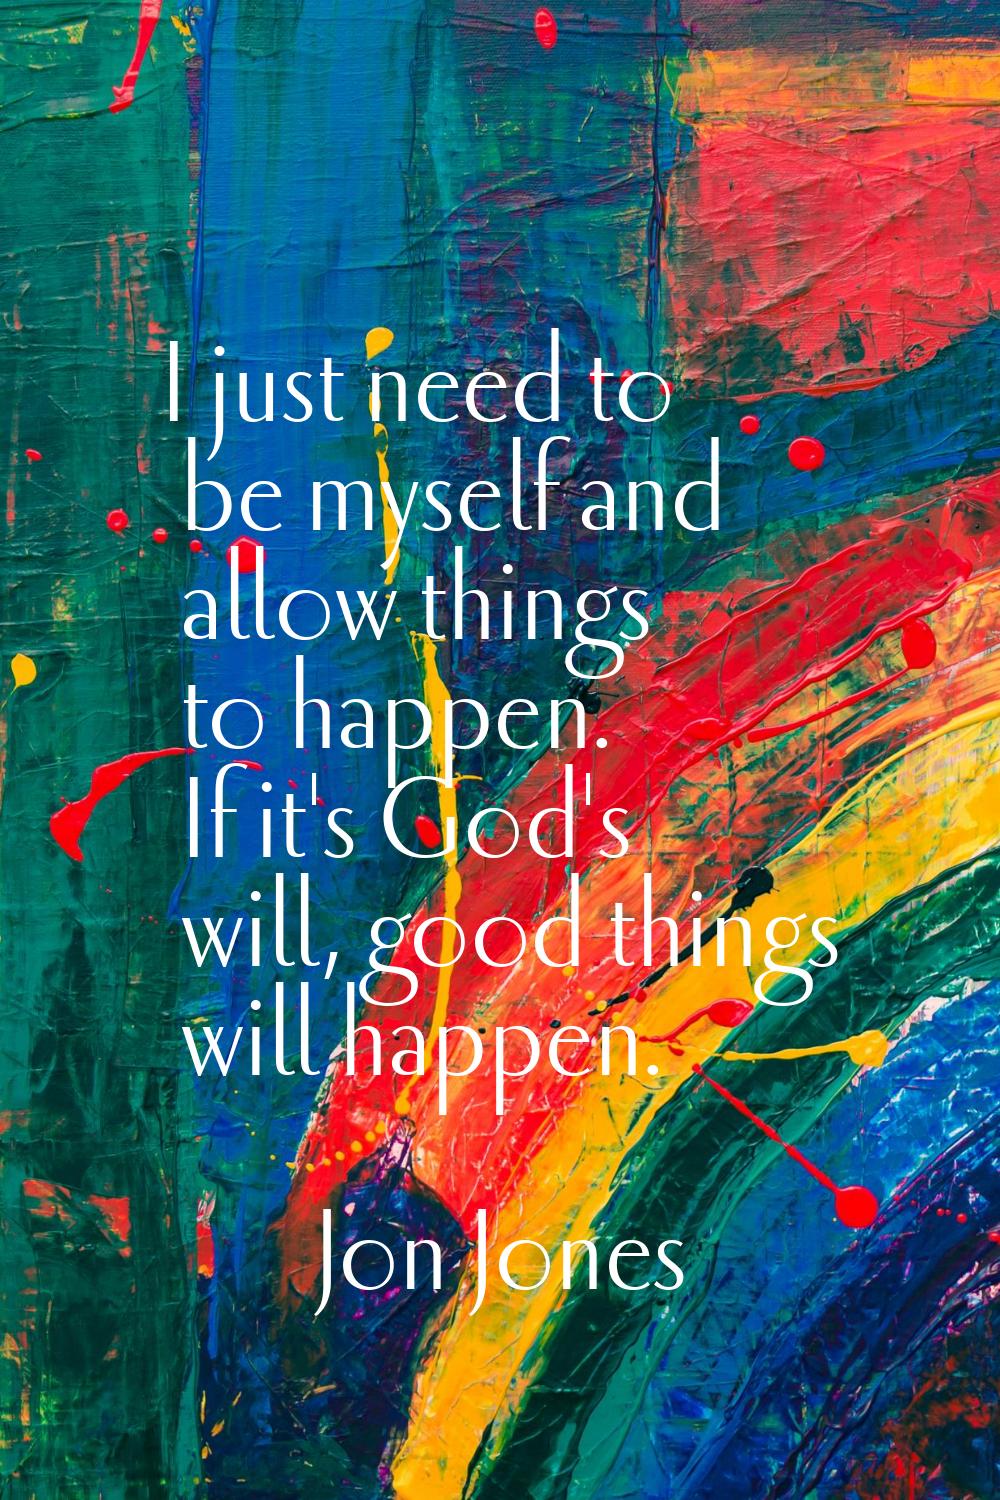 I just need to be myself and allow things to happen. If it's God's will, good things will happen.